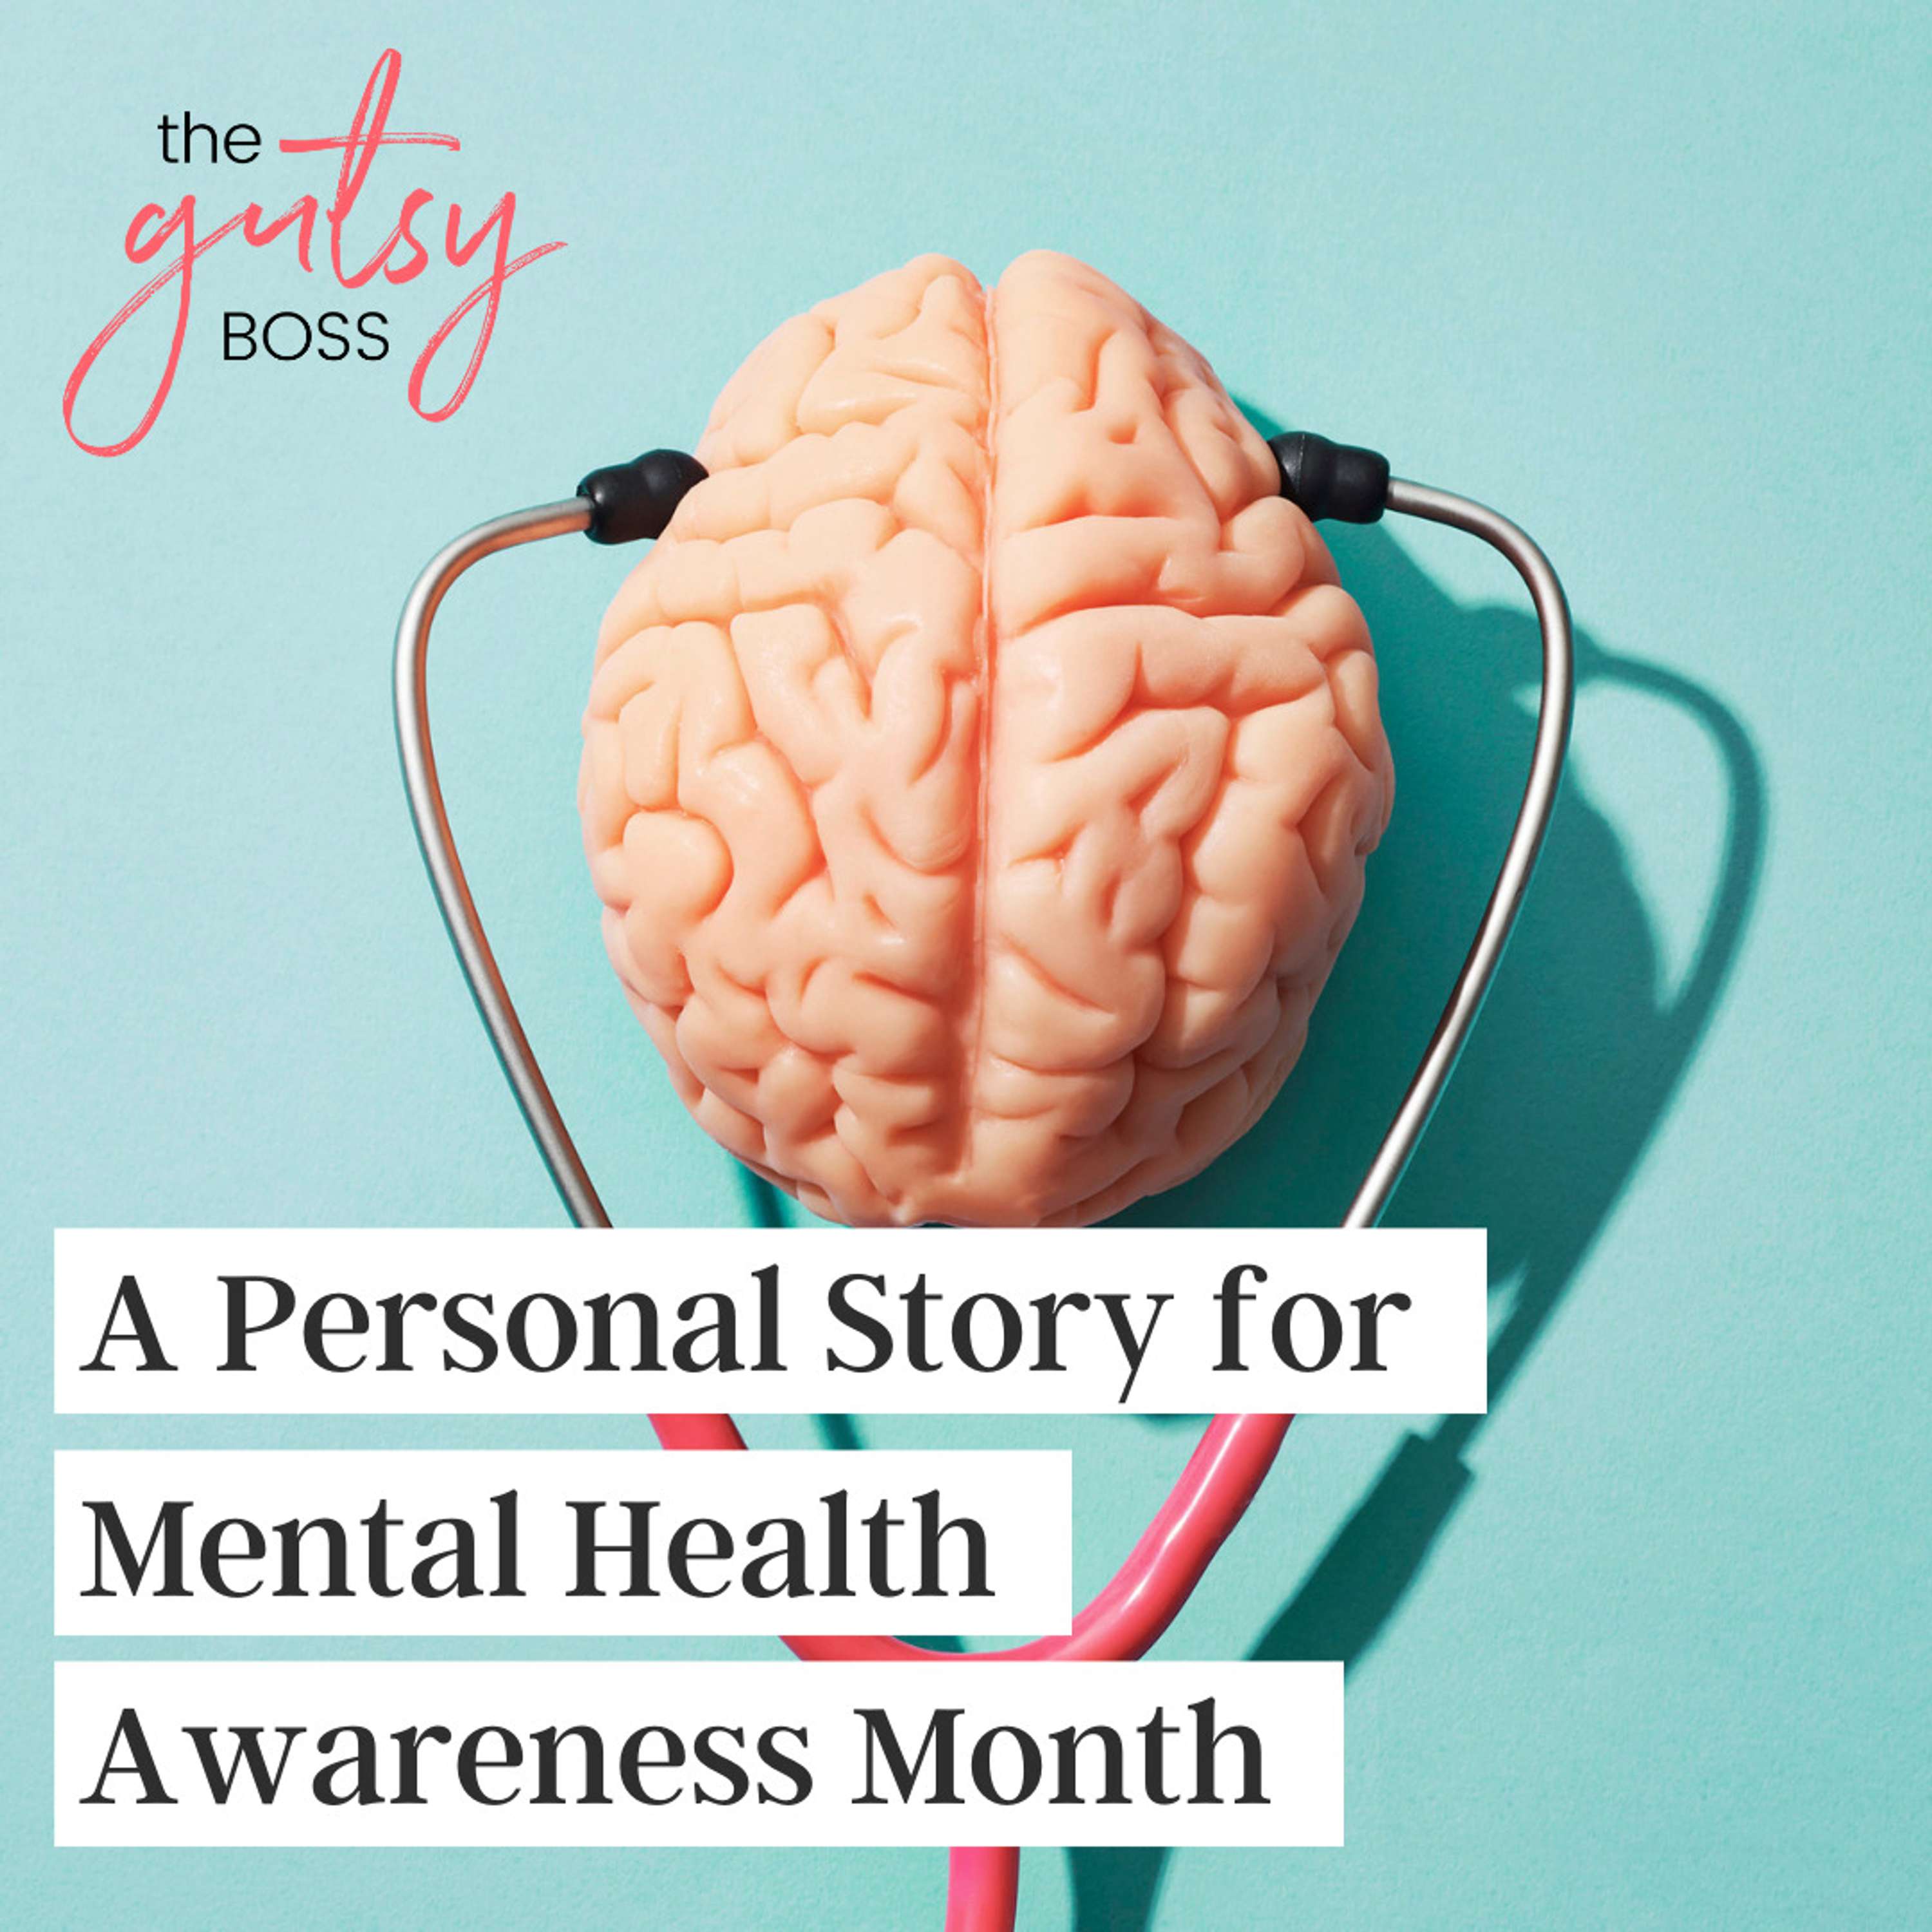 23. A Personal Story in Honor of Mental Health Awareness Month